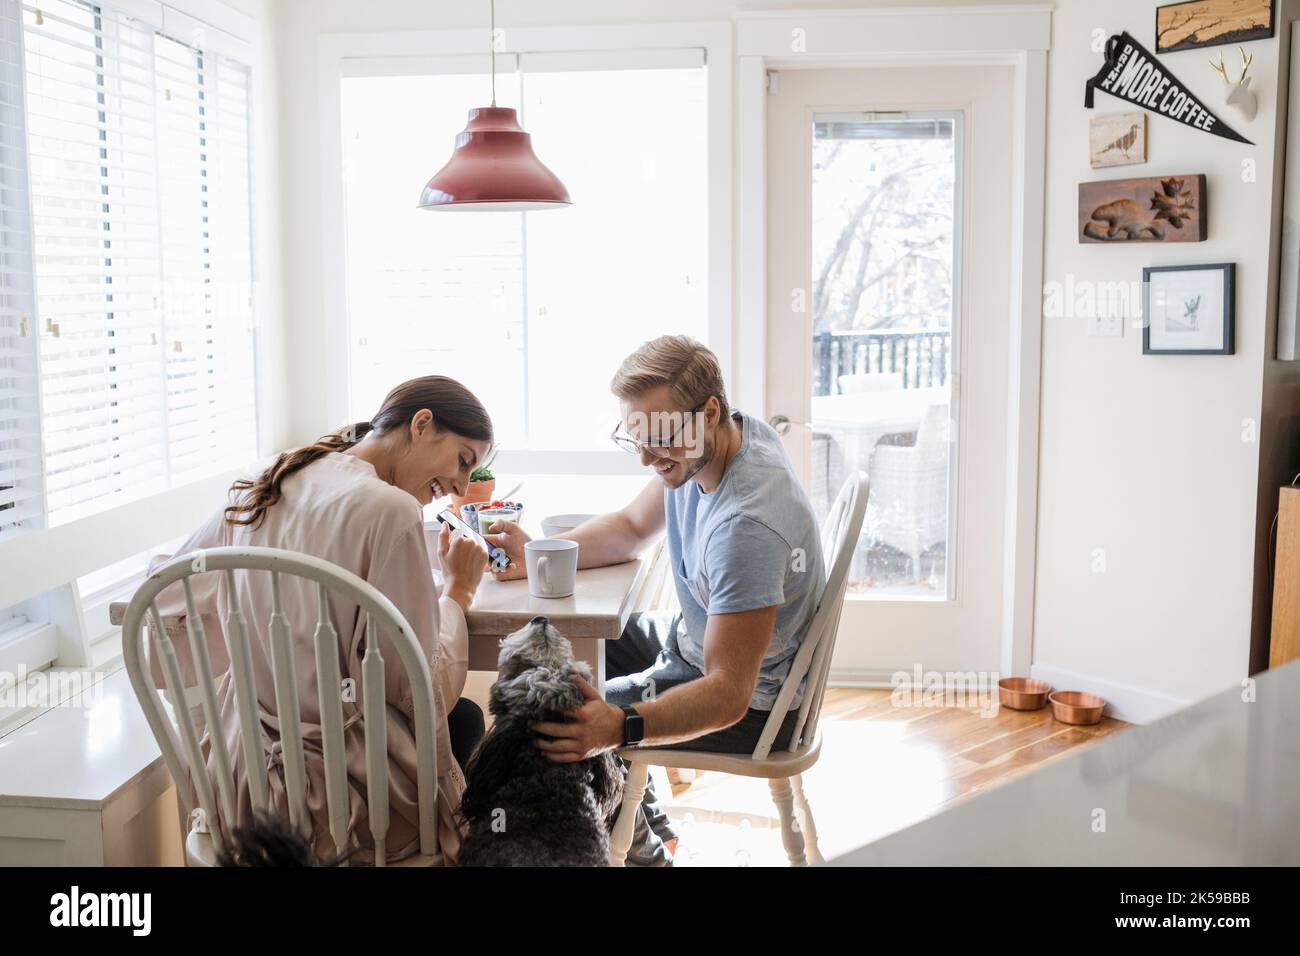 Couple stroking family pet dog at breakfast table Stock Photo